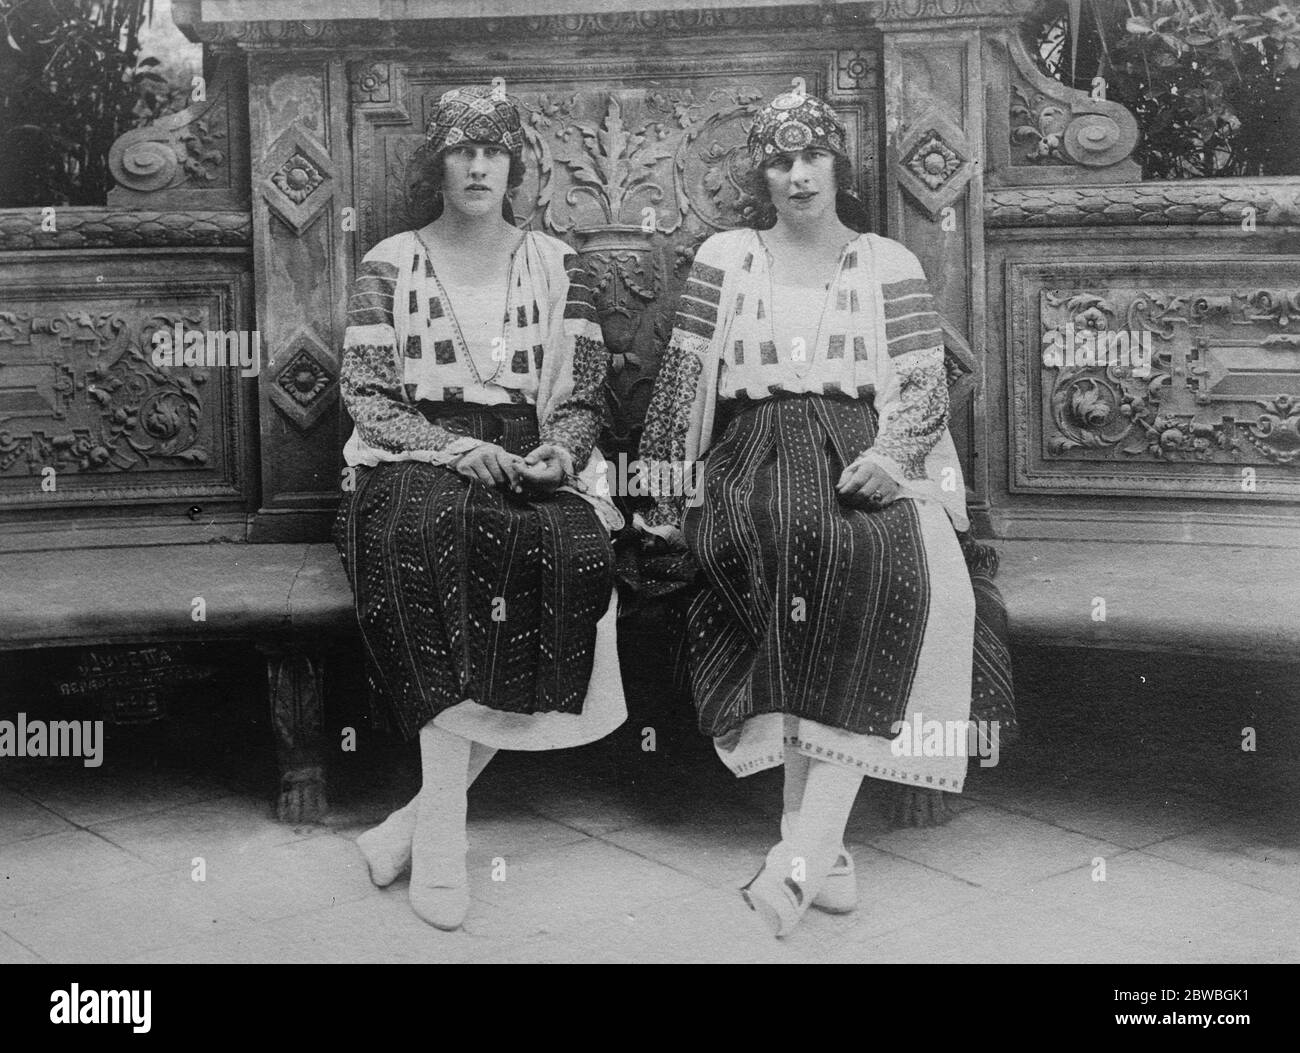 Charming Royal Sisters in National Costume Princess Irene of Greece who recently celebrated her 19 birthday , is seen here in Roumanian national costume with her eldest sister Princess Helene , now Crown Princess of ROumania . Princess Irene is on the left . SHe is engaged to marry the dDuke of Apulia and it is said will spend part of her honeymoon in London Harrogate 5 April 1923 Stock Photo